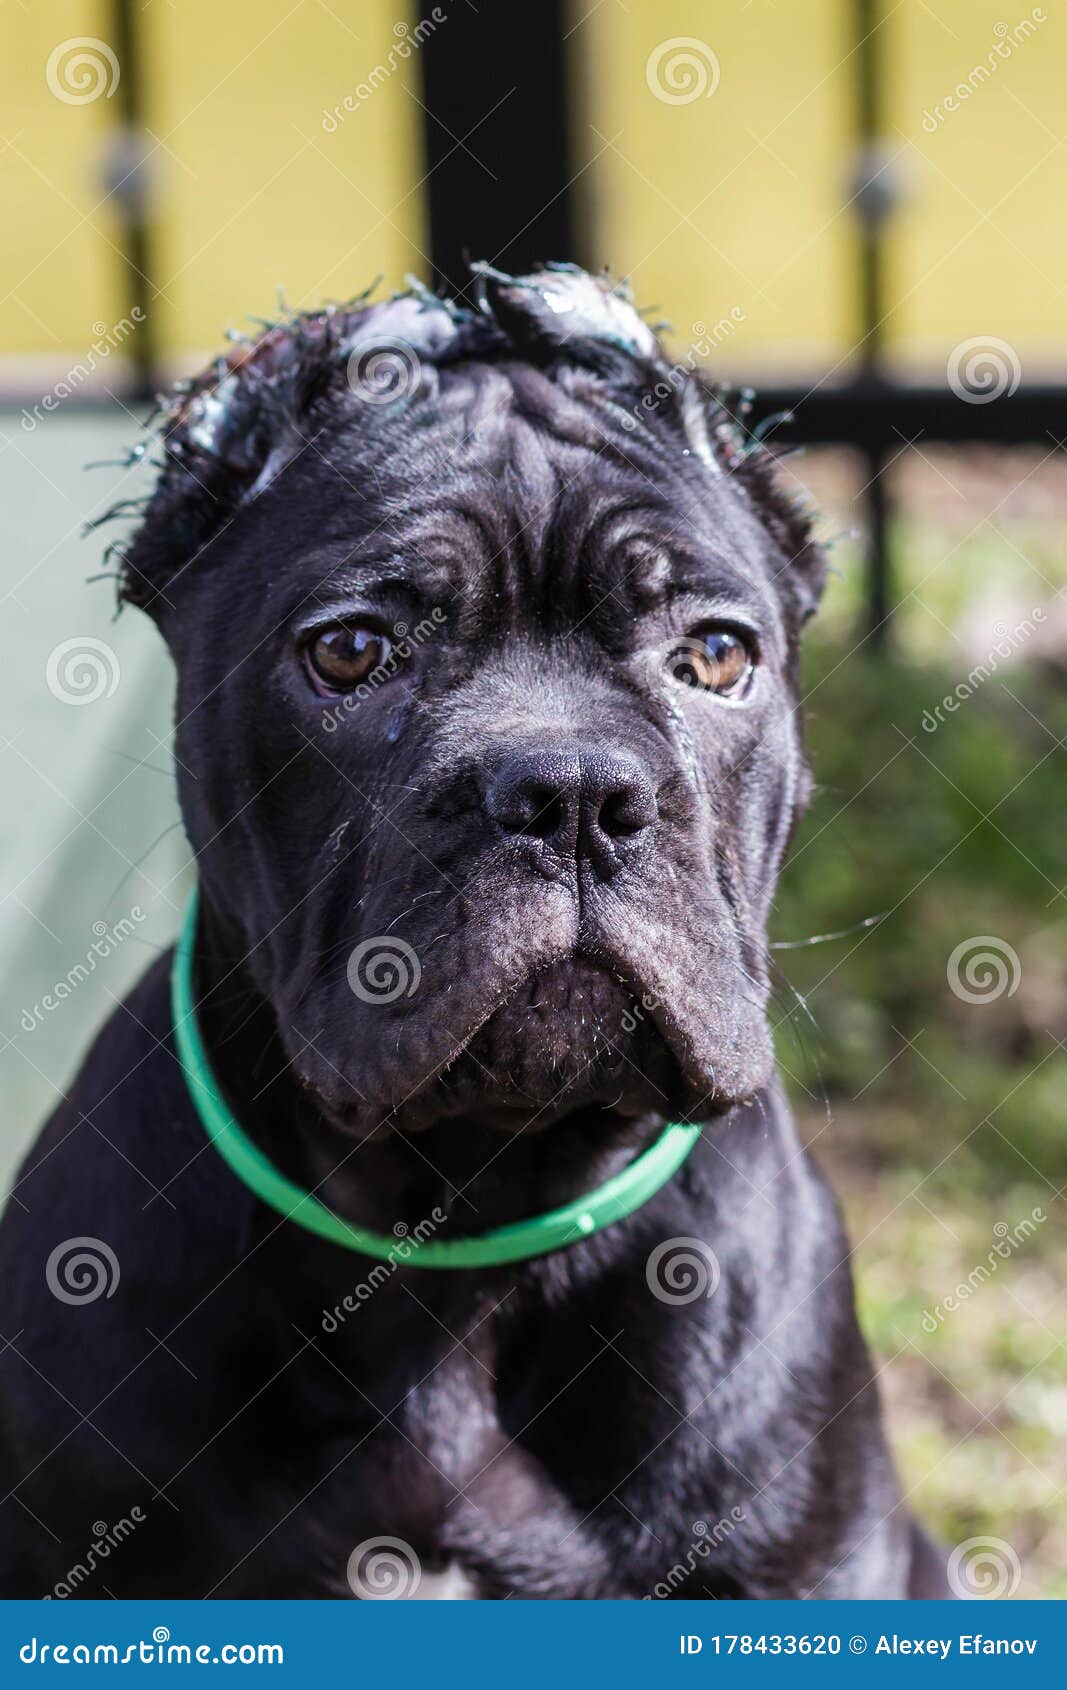 CaneCorso Puppy With Cropped Ears Stock Photo Image of